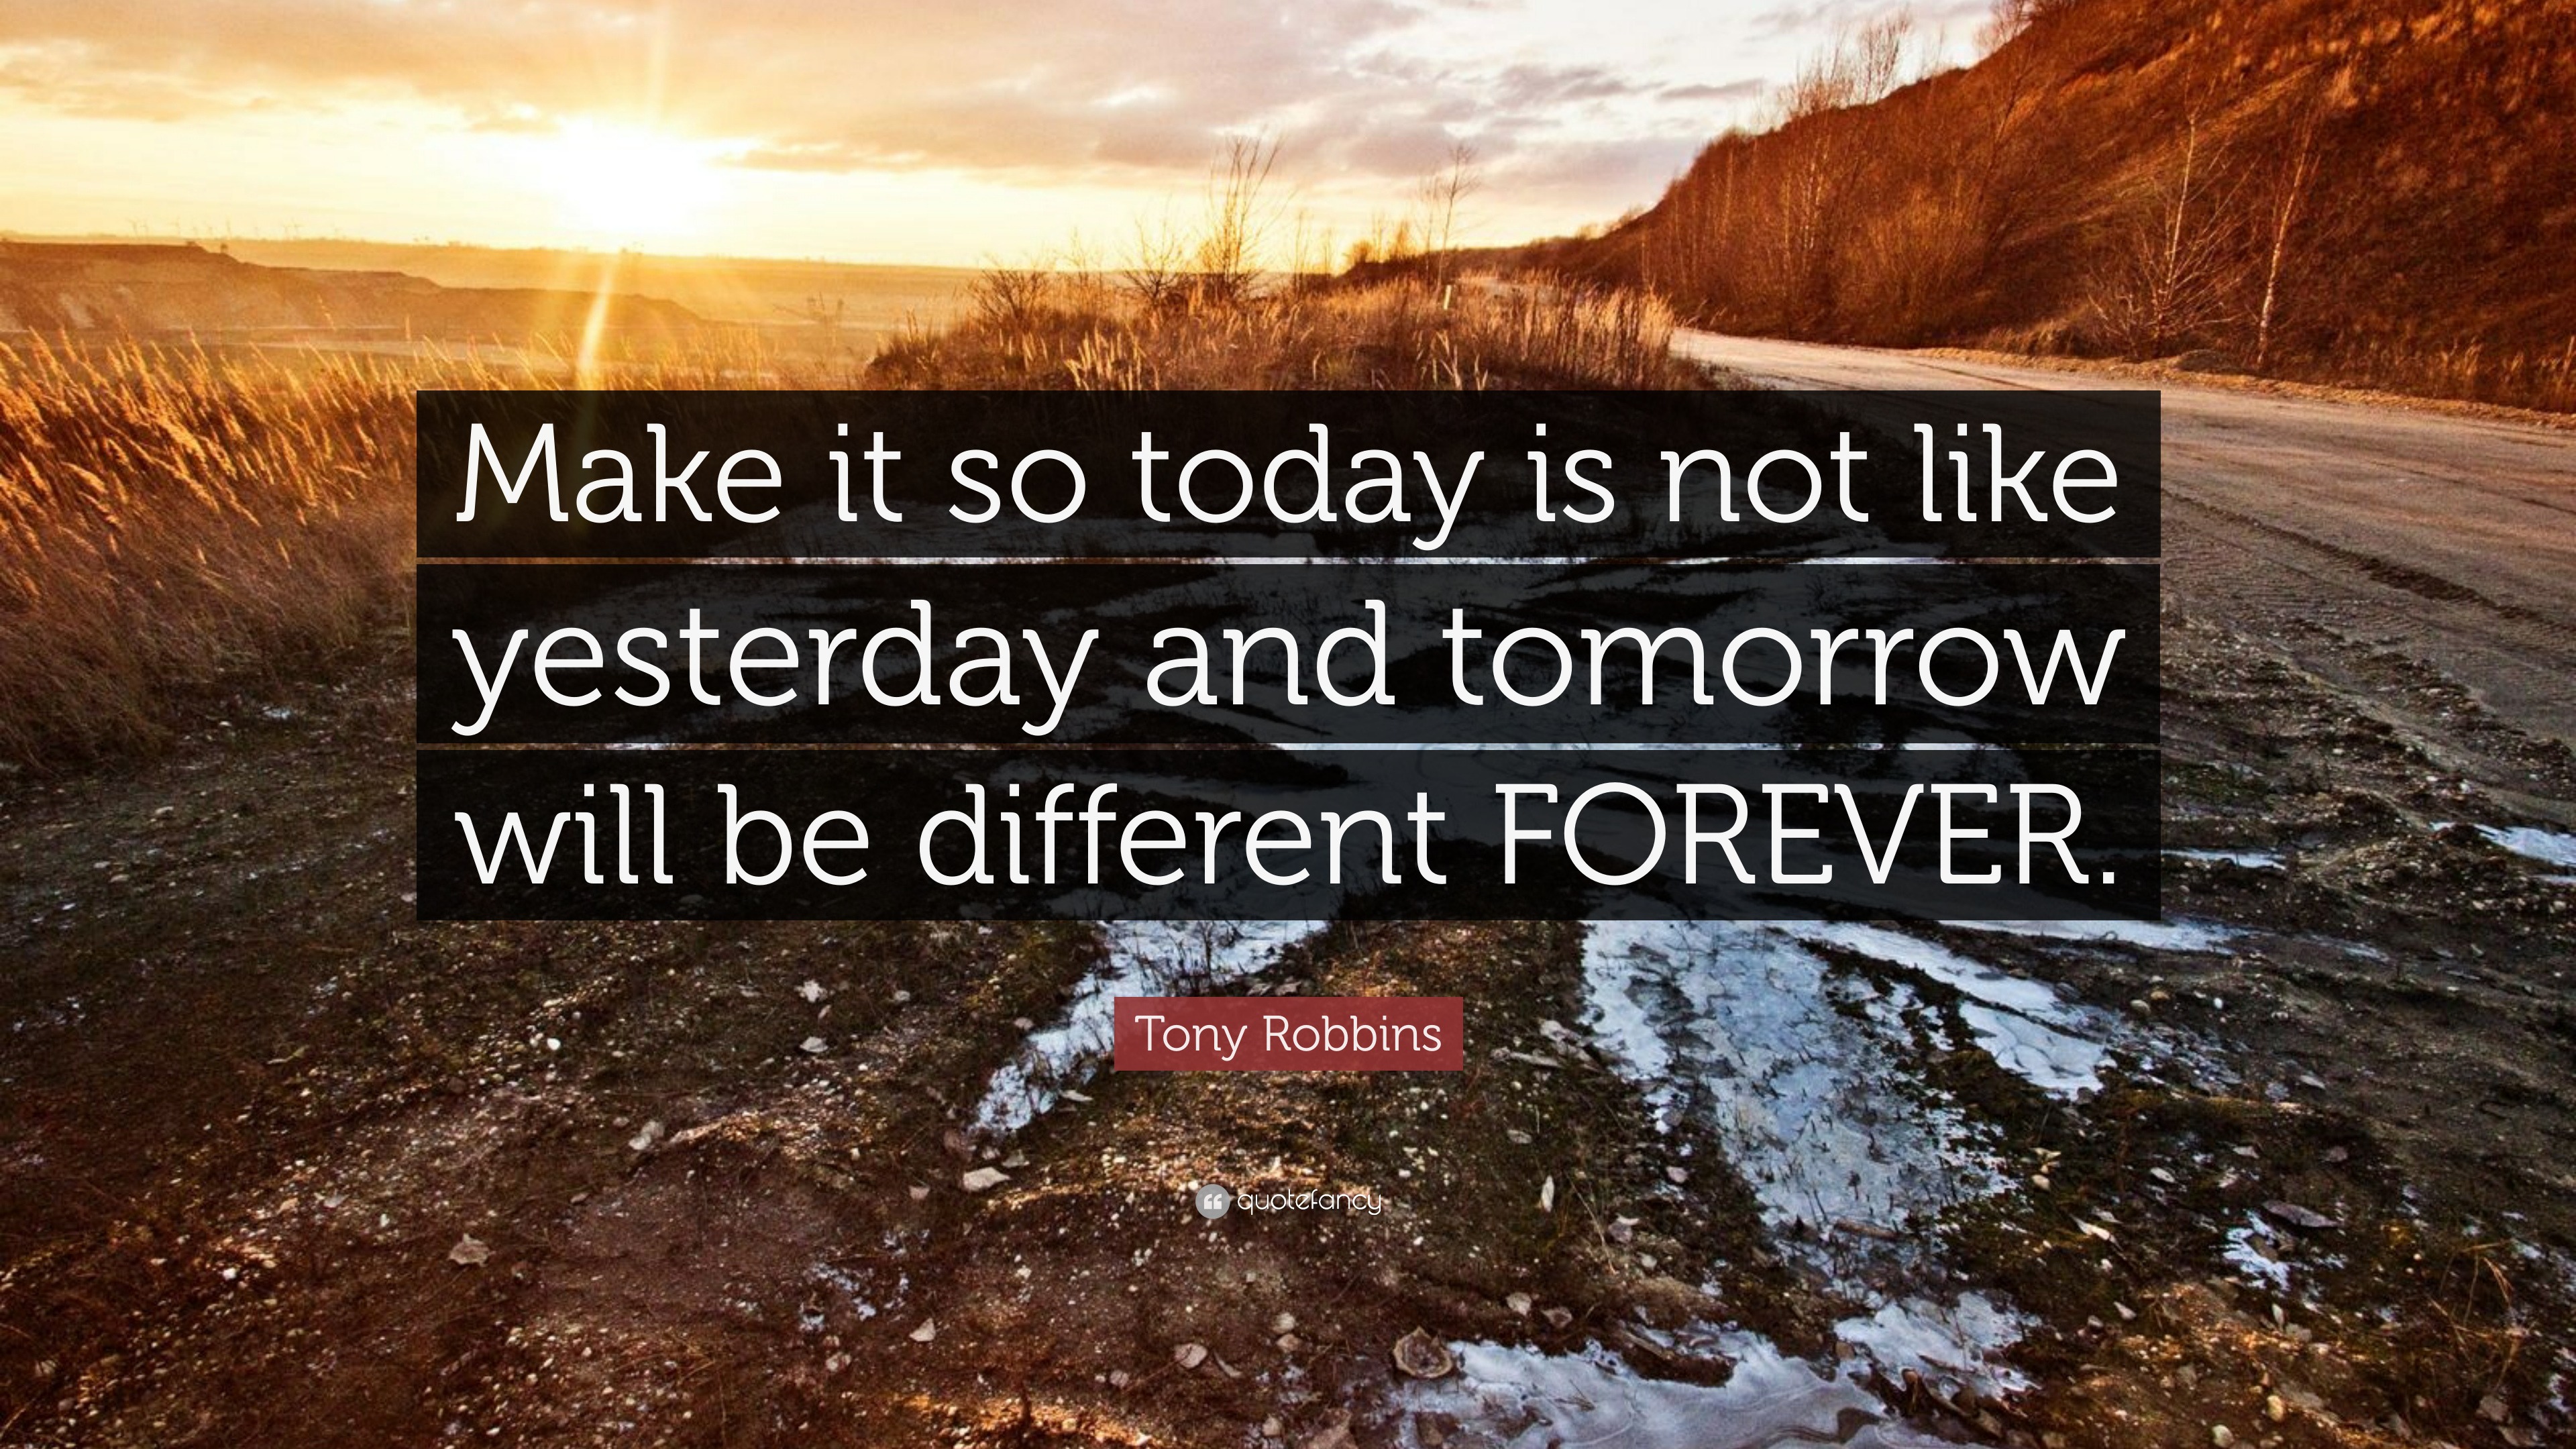 Tony Robbins Quote: “Make it so today is not like yesterday and ...